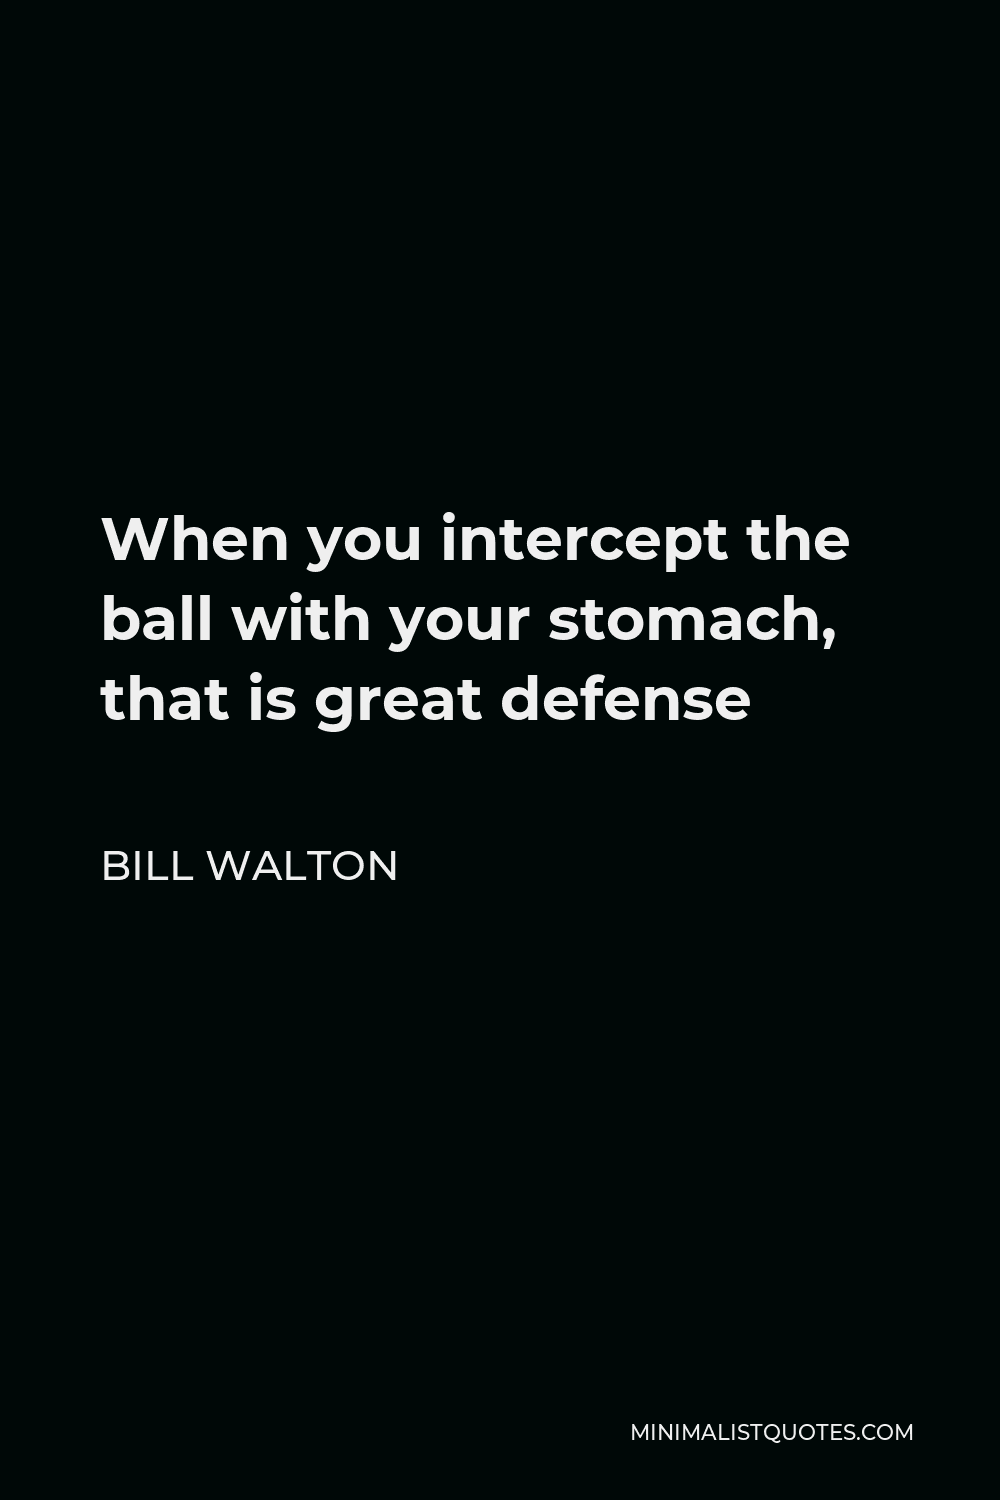 Bill Walton Quote - When you intercept the ball with your stomach, that is great defense